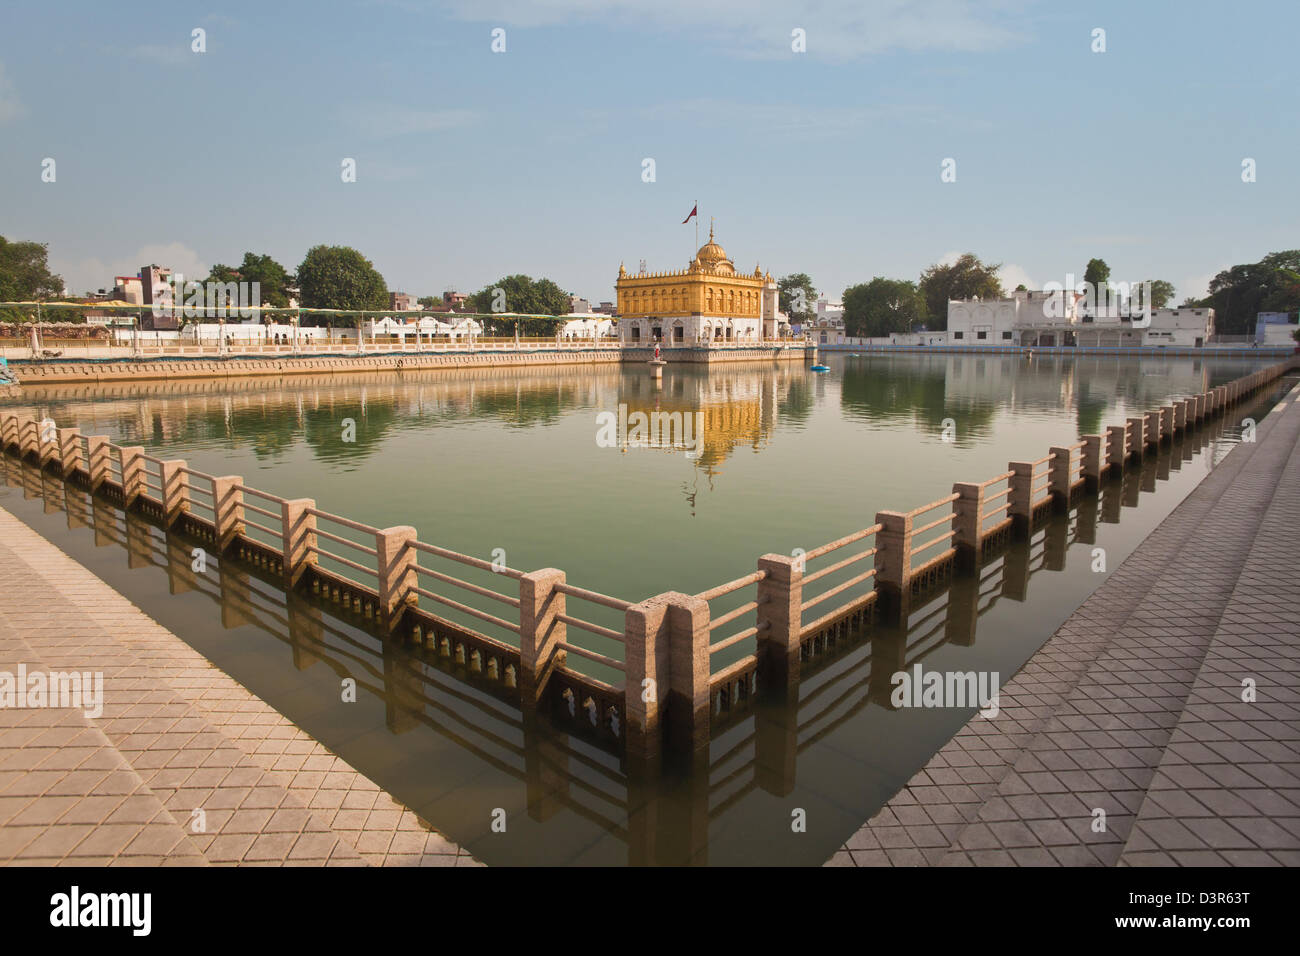 Temple in a pond, Durgiana Temple, Amritsar, Punjab, India Stock Photo